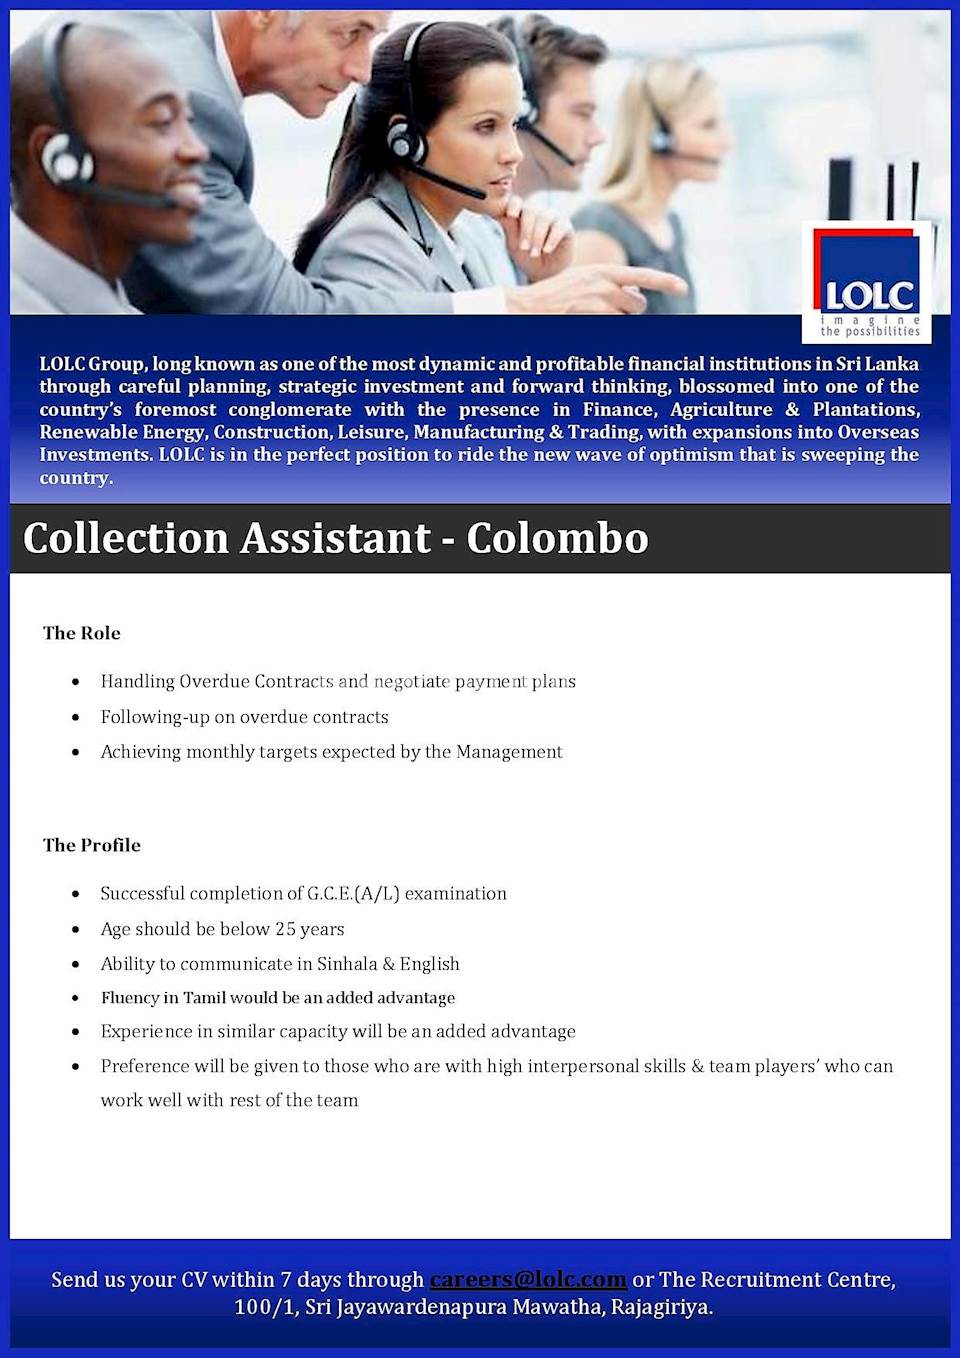 Collection Assistant - Colombo